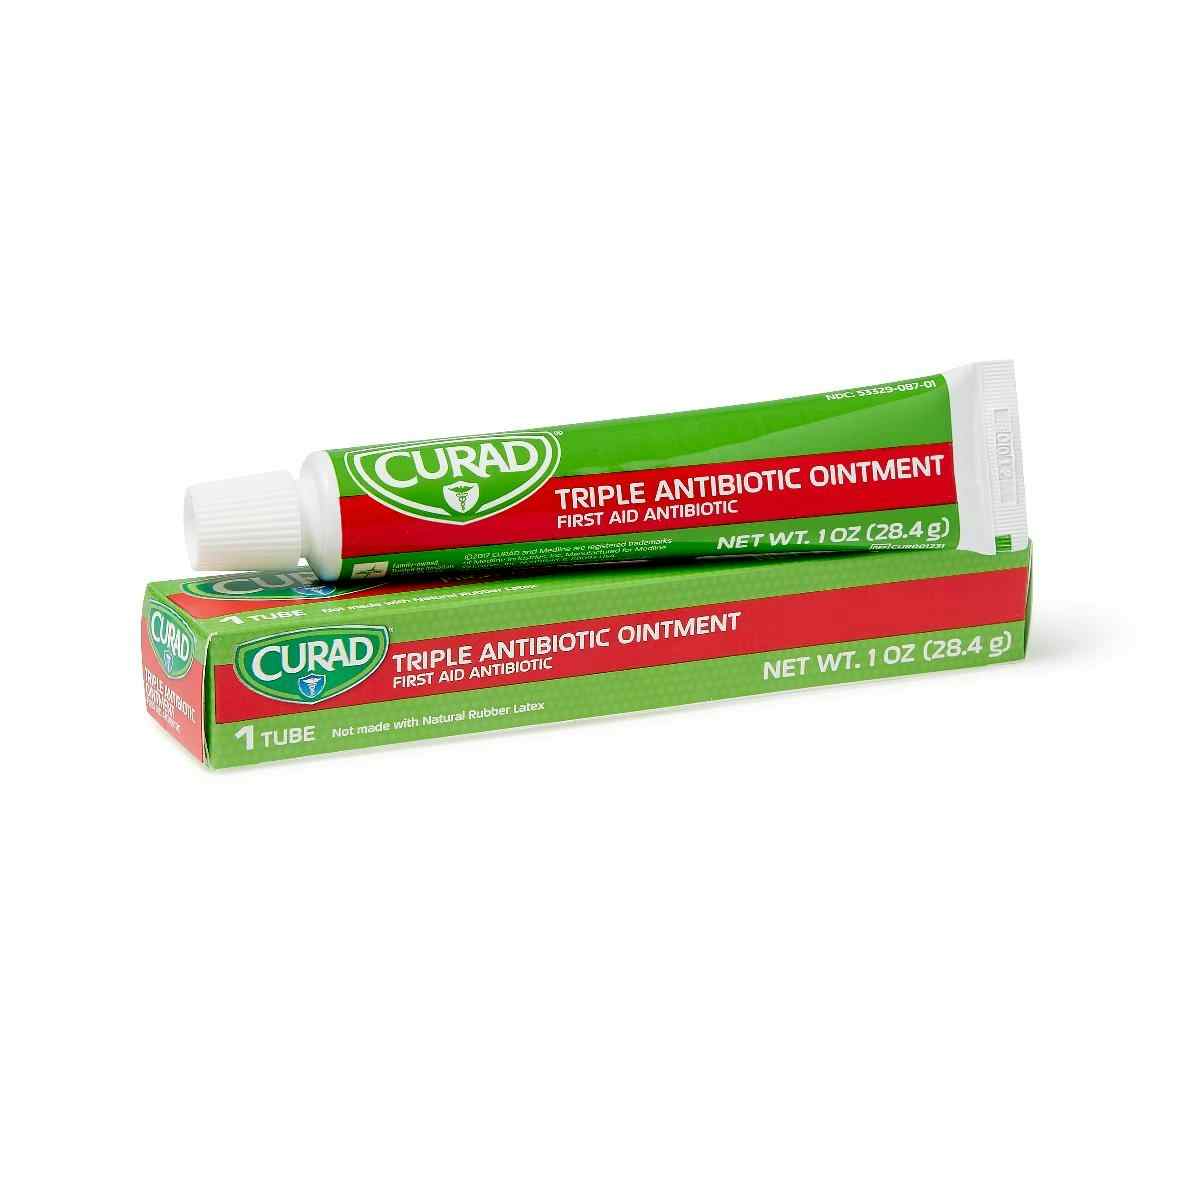 Curad Triple Antibiotic Ointment, CUR001231, 1 oz. Tube - Case of 12